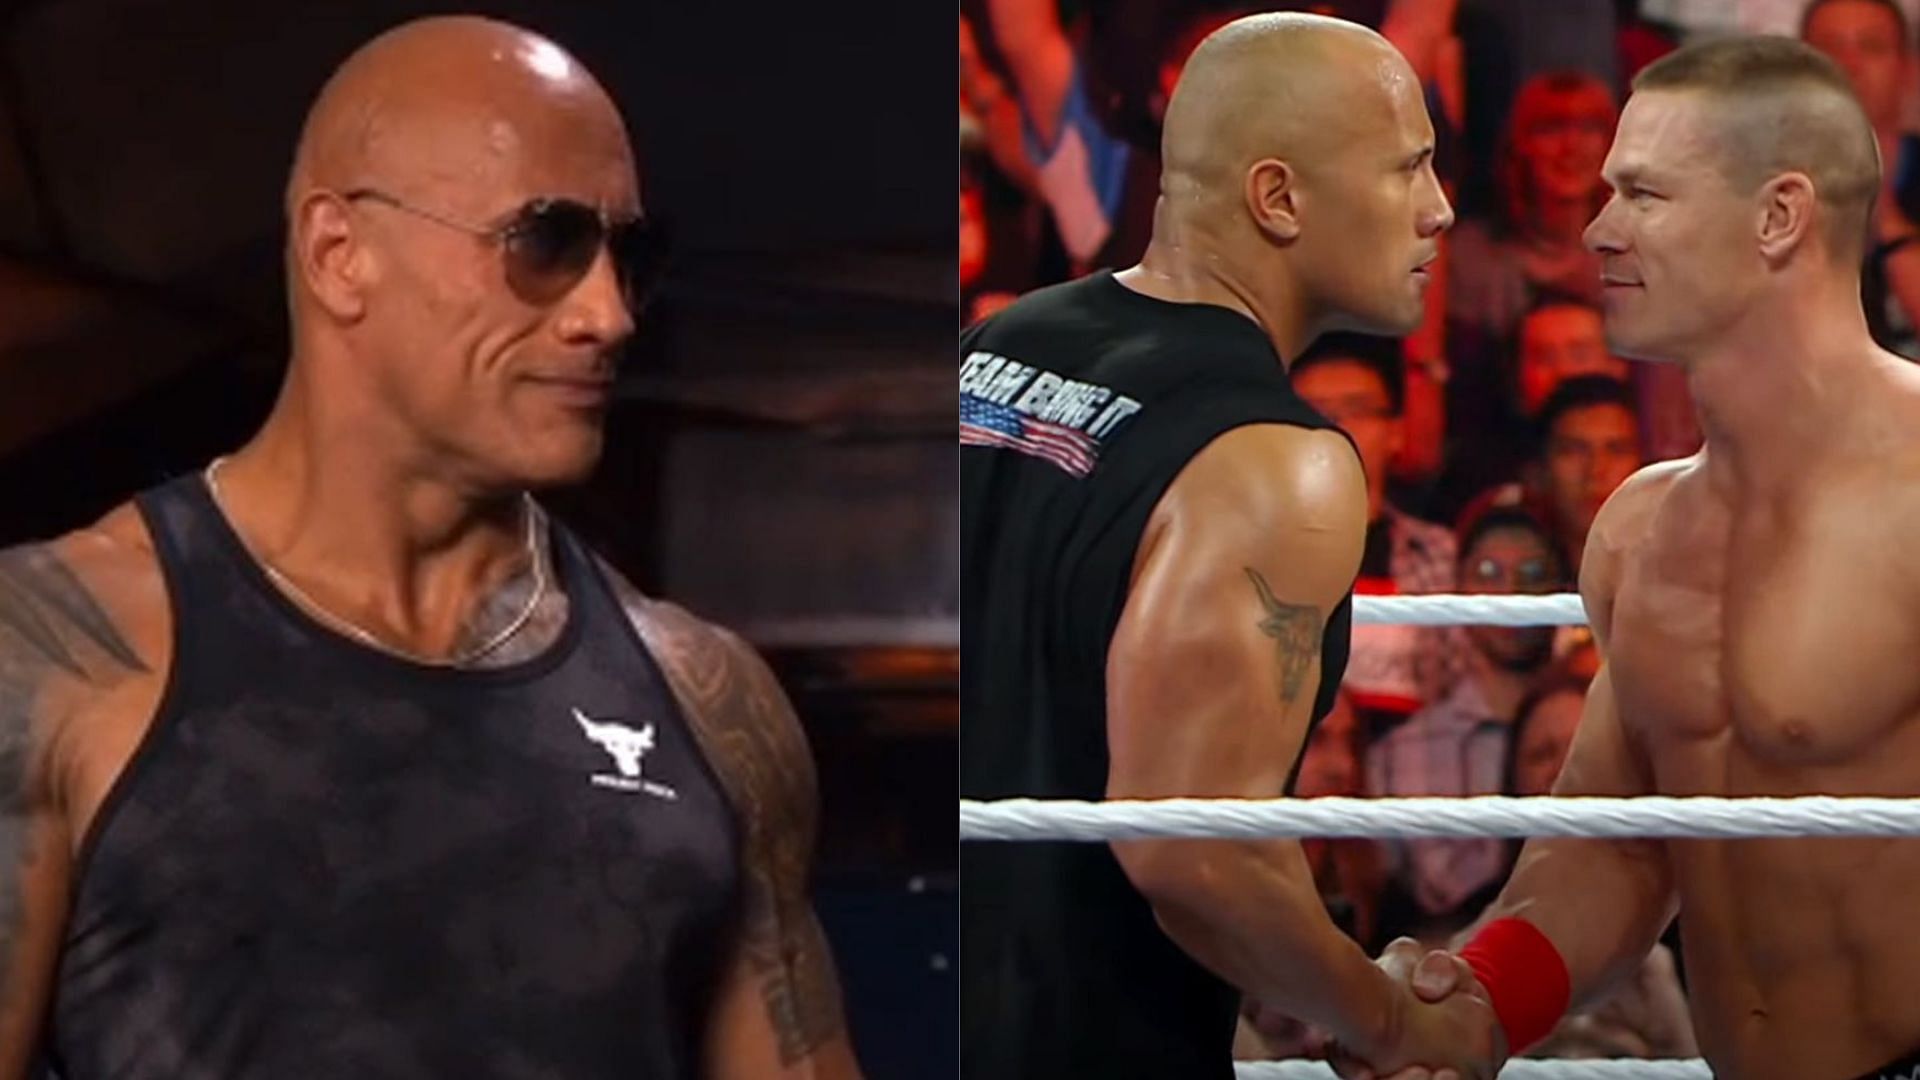 The Rock crossed paths with John Cena on SmackDown